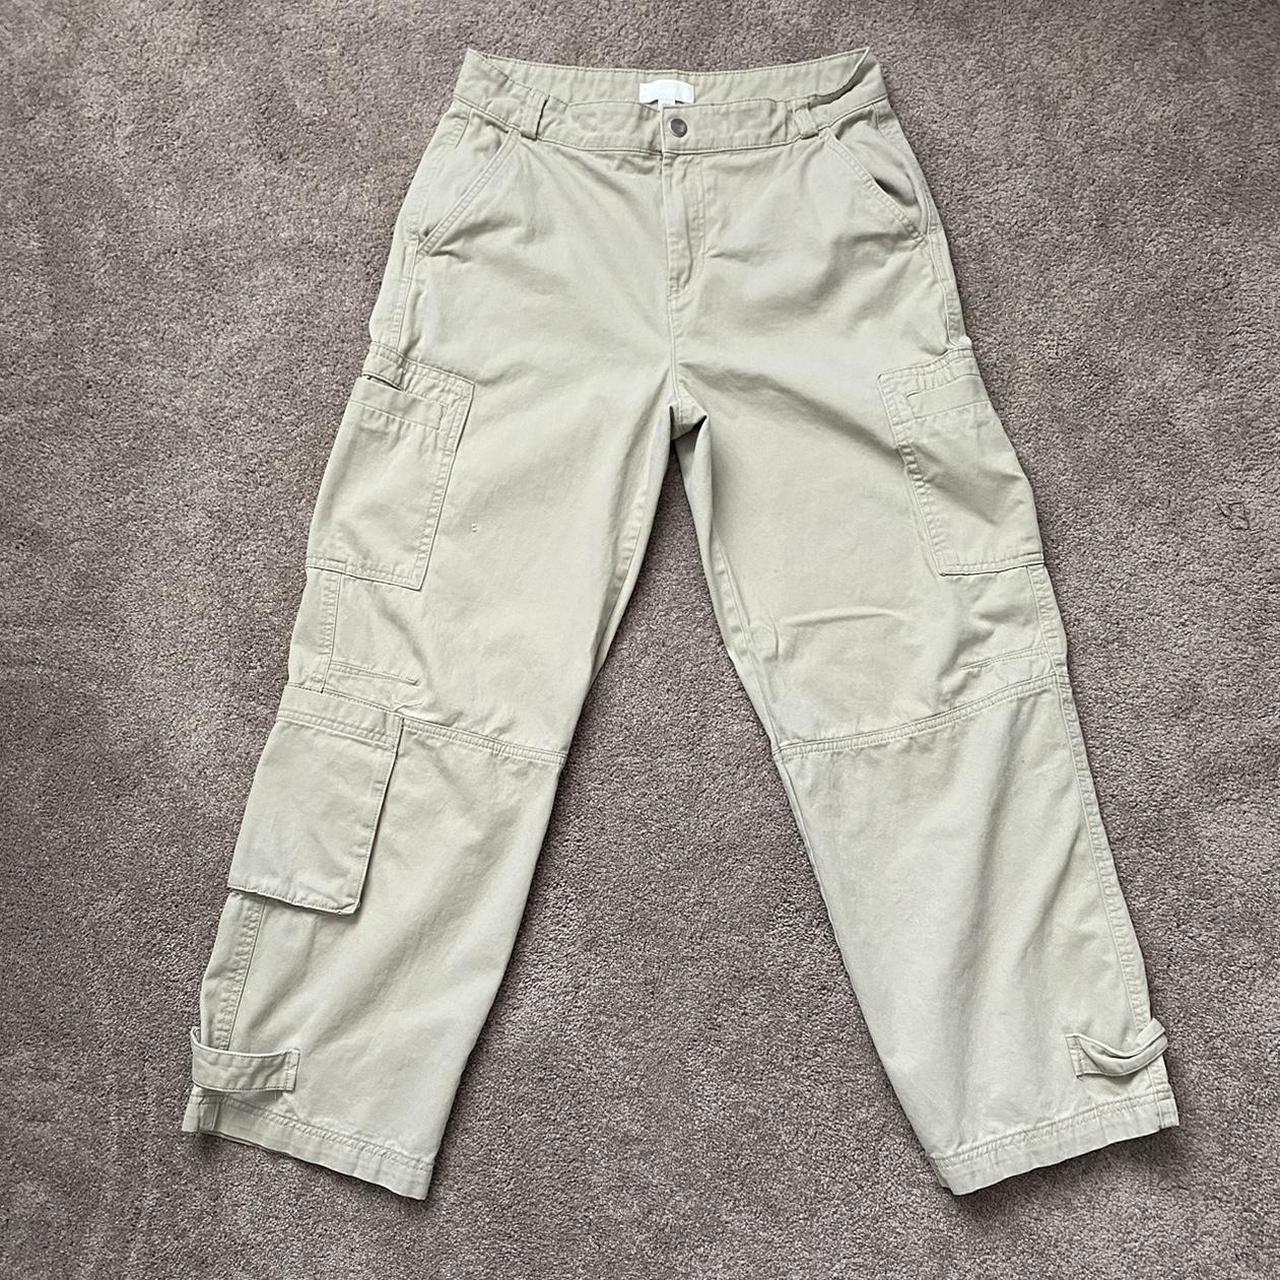 H&M Cargo Cream Pants Clicking button Small hole on... - Depop